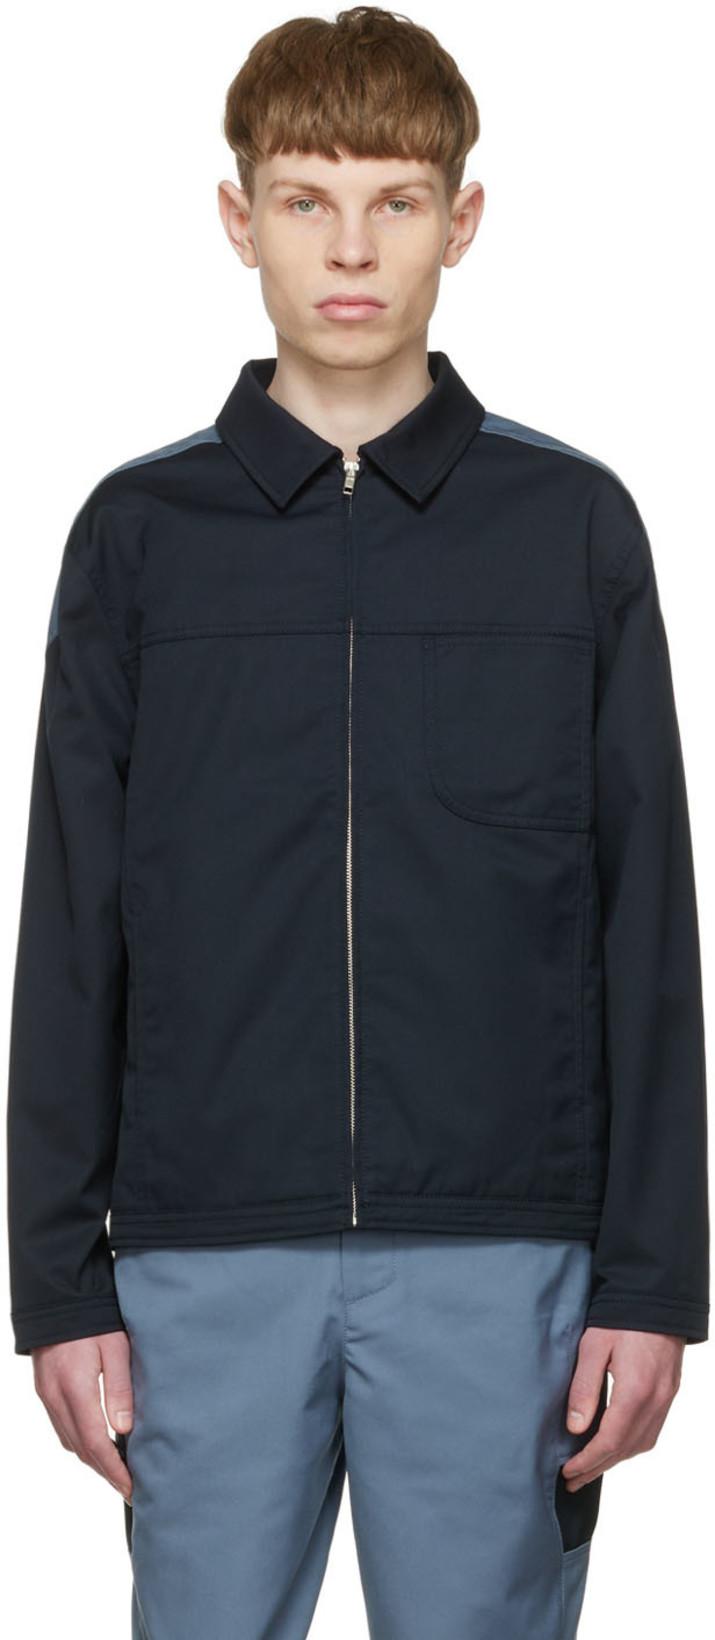 Navy Polyester Jacket by AFFXWRKS